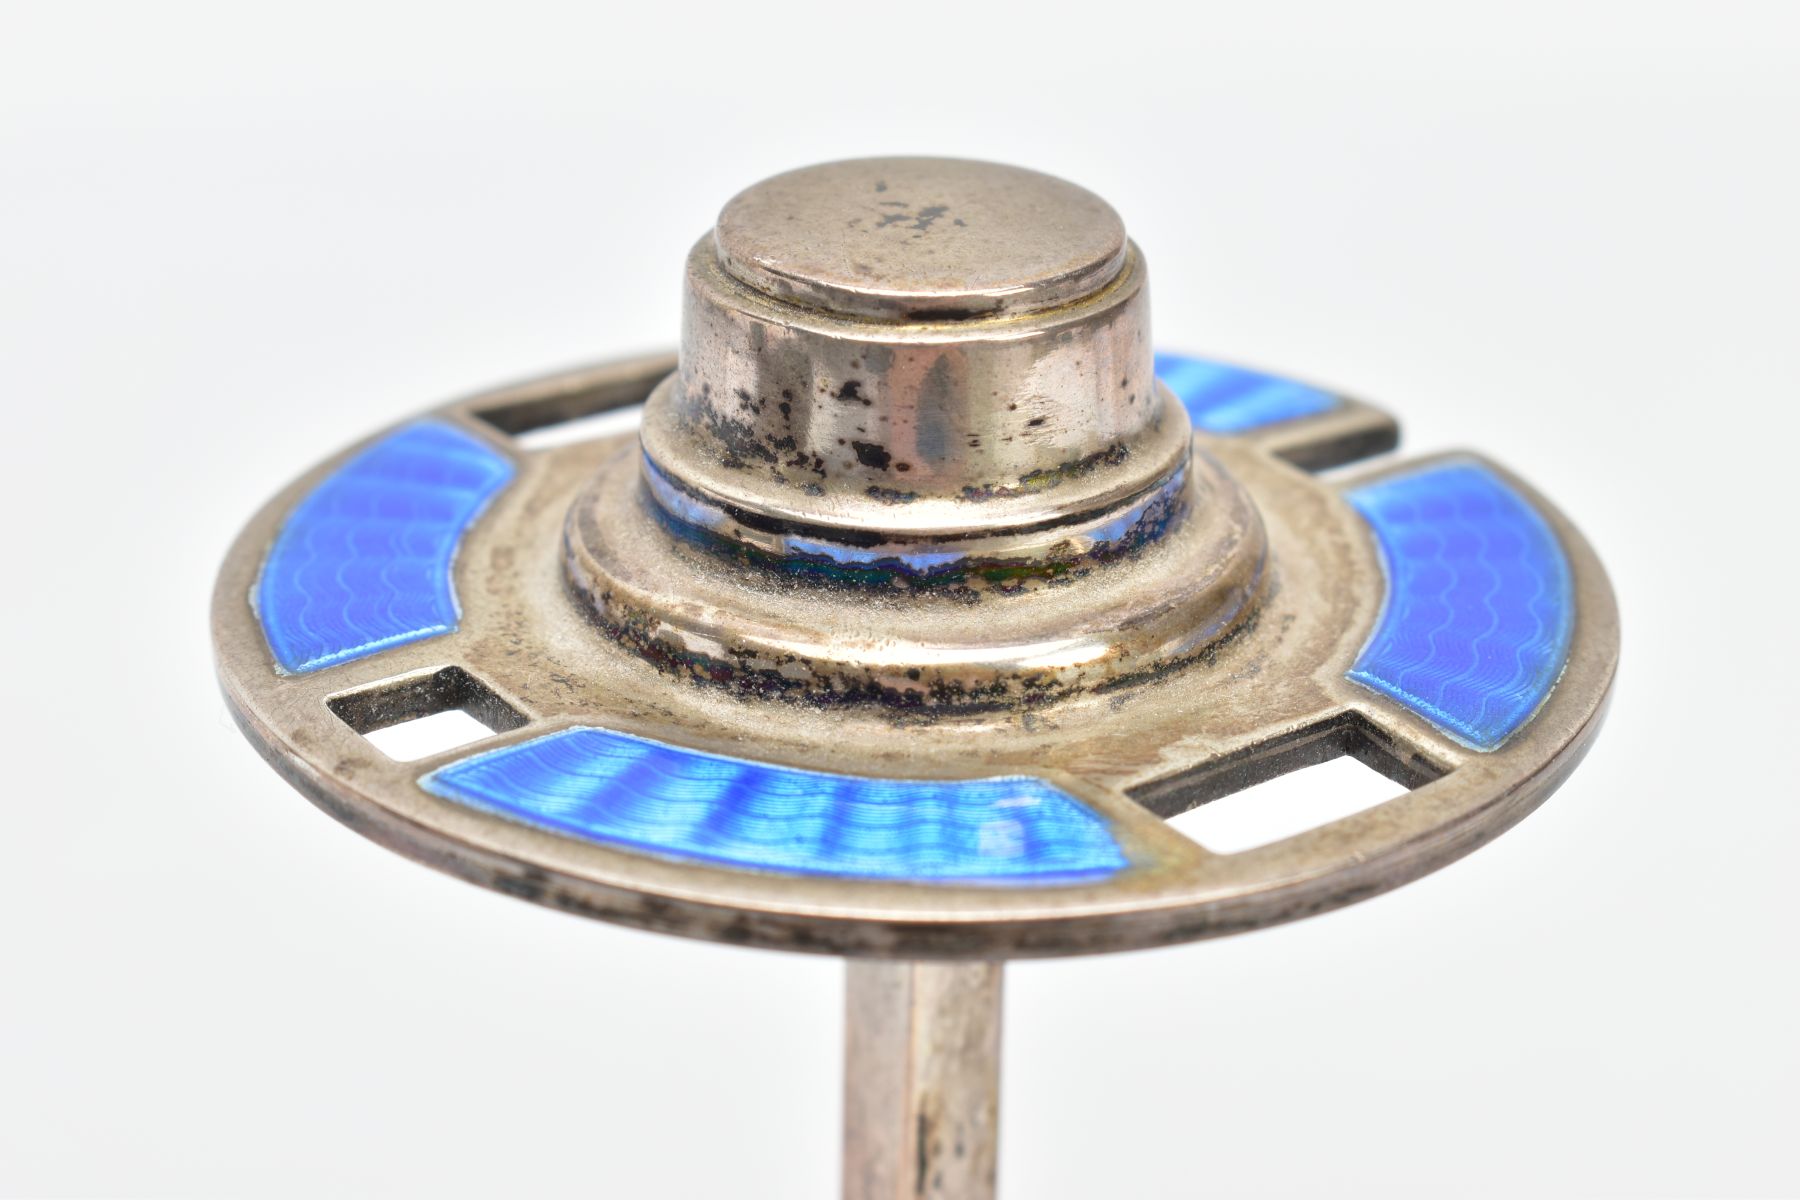 A 1930S SILVER ENAMEL MANICURE STAND, a circular silver stand with blue guilloche enamel detail - Image 9 of 9